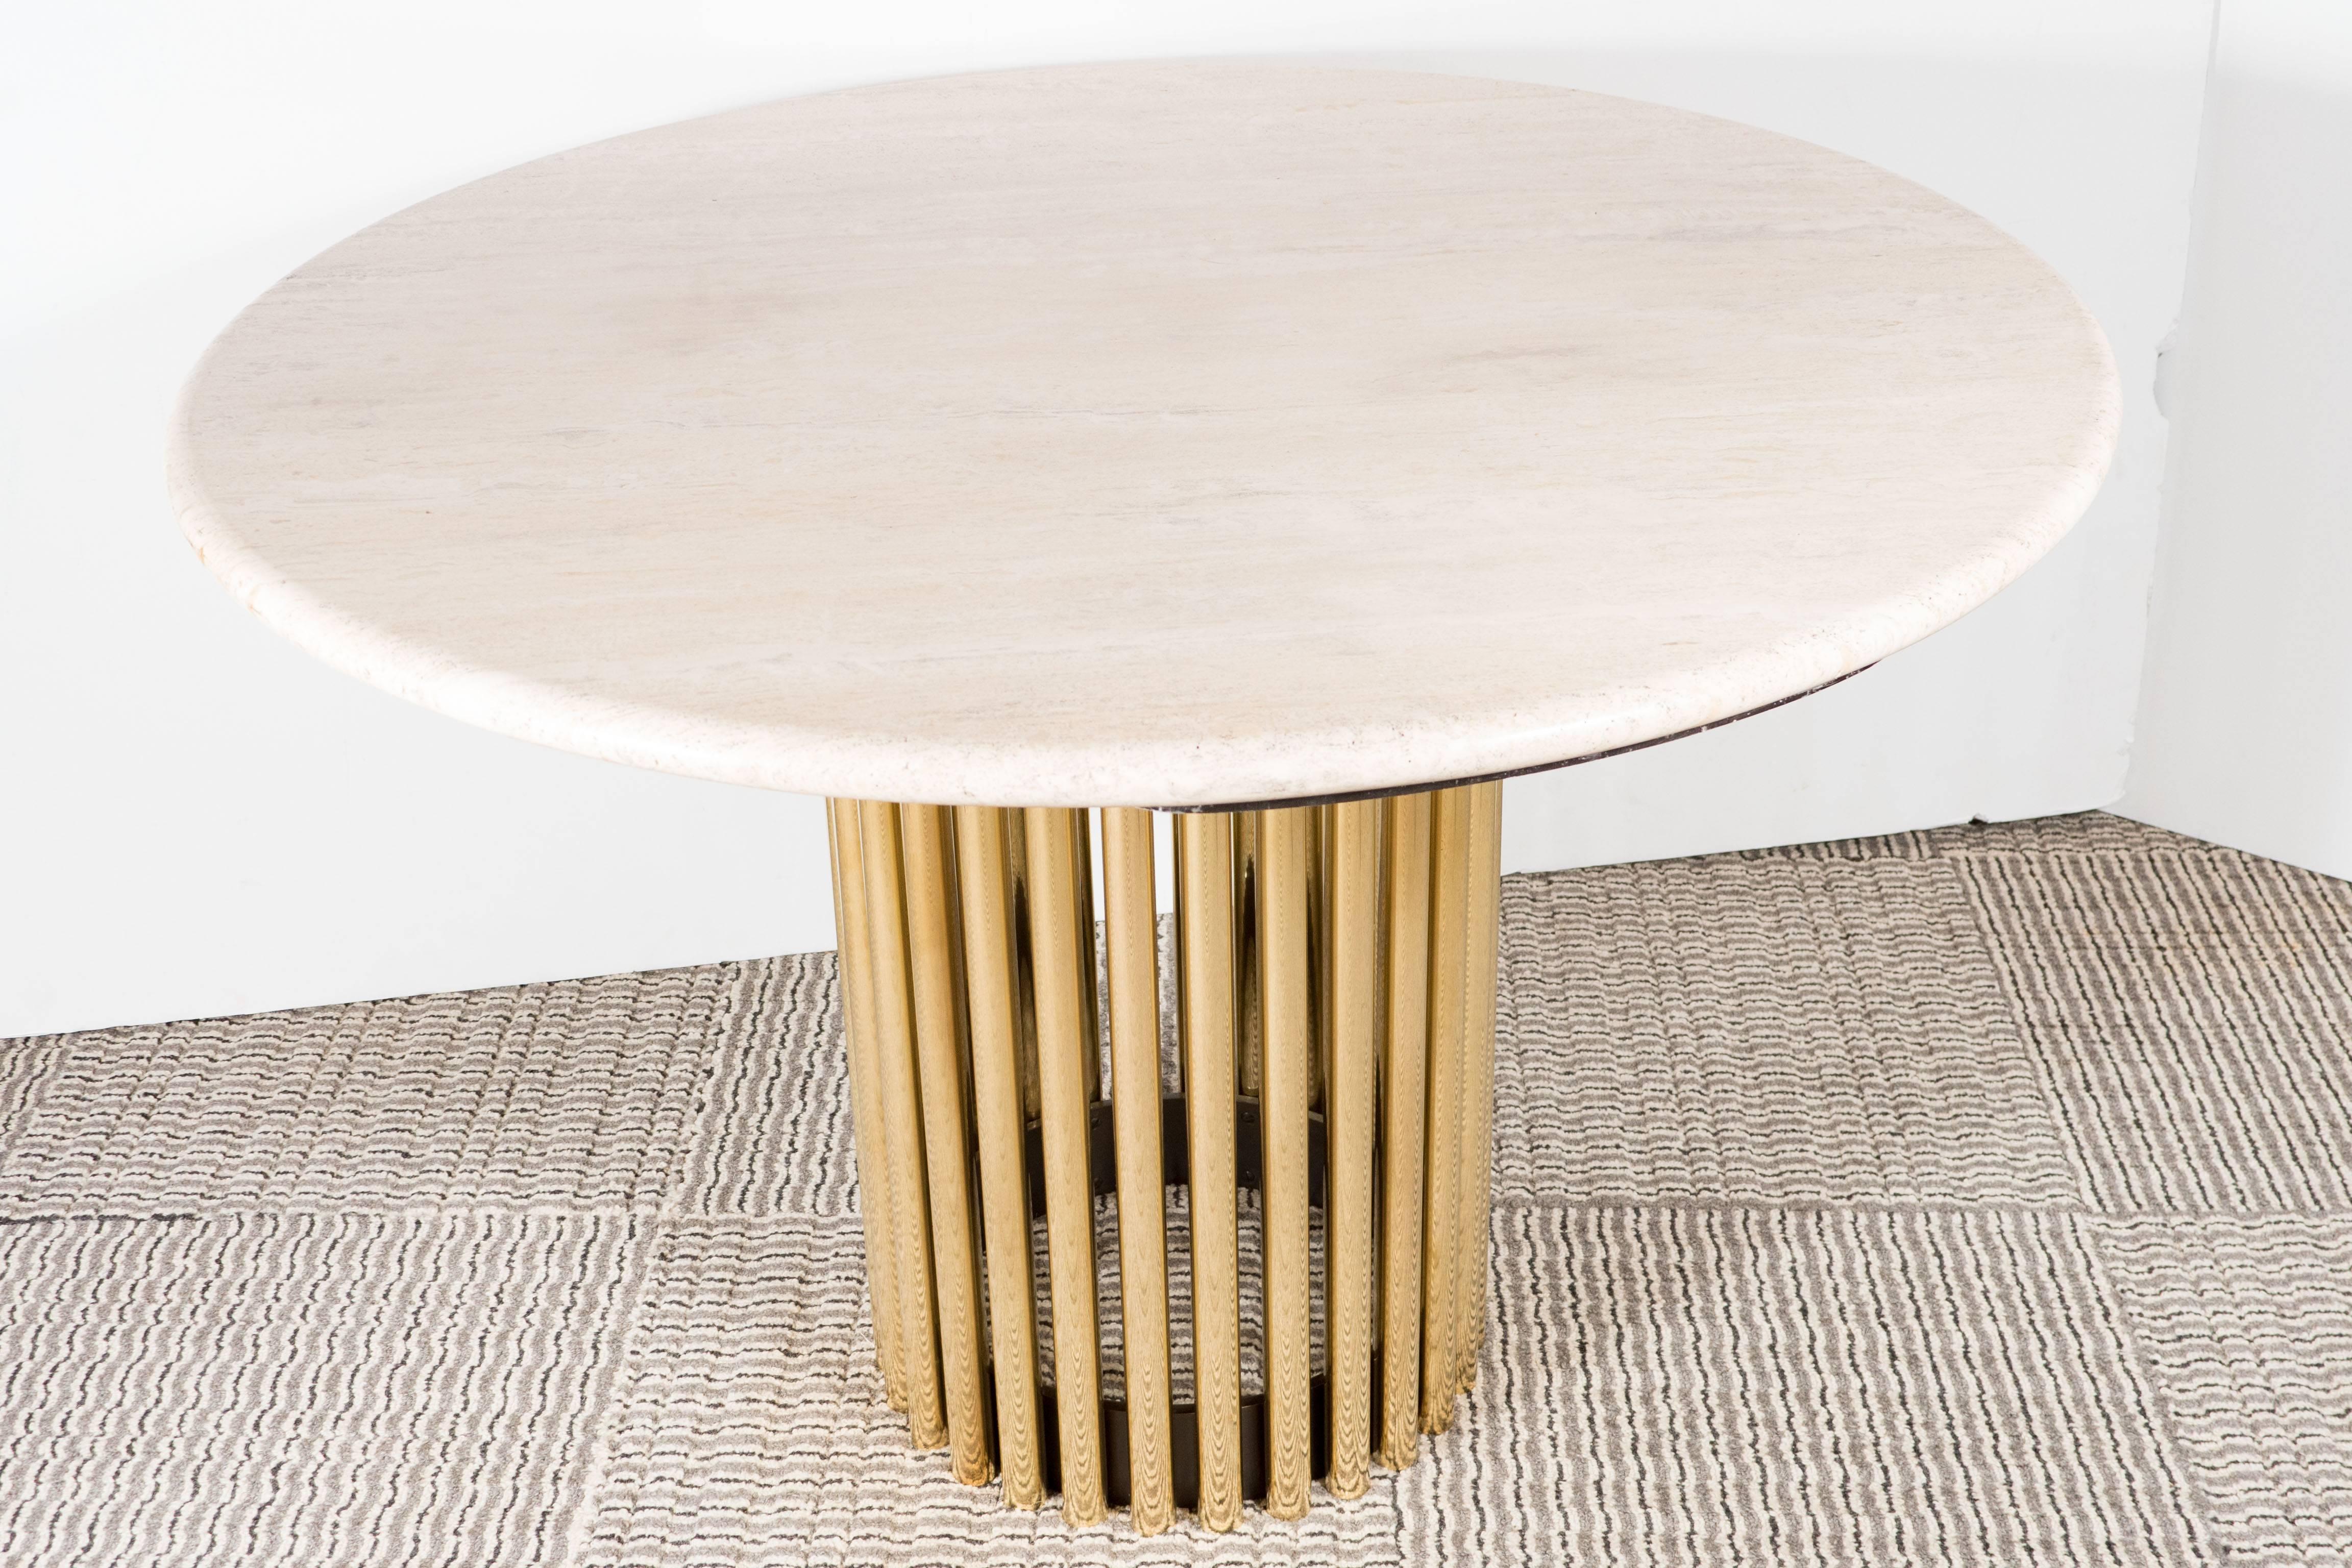 A Mid-Century Modernist dining or center table featuring a polished brass tubular base. The brass rods are connected by an enameled base ring. The base supports a polished, circular travertine top, which displays warm hues of cream and beige notes.